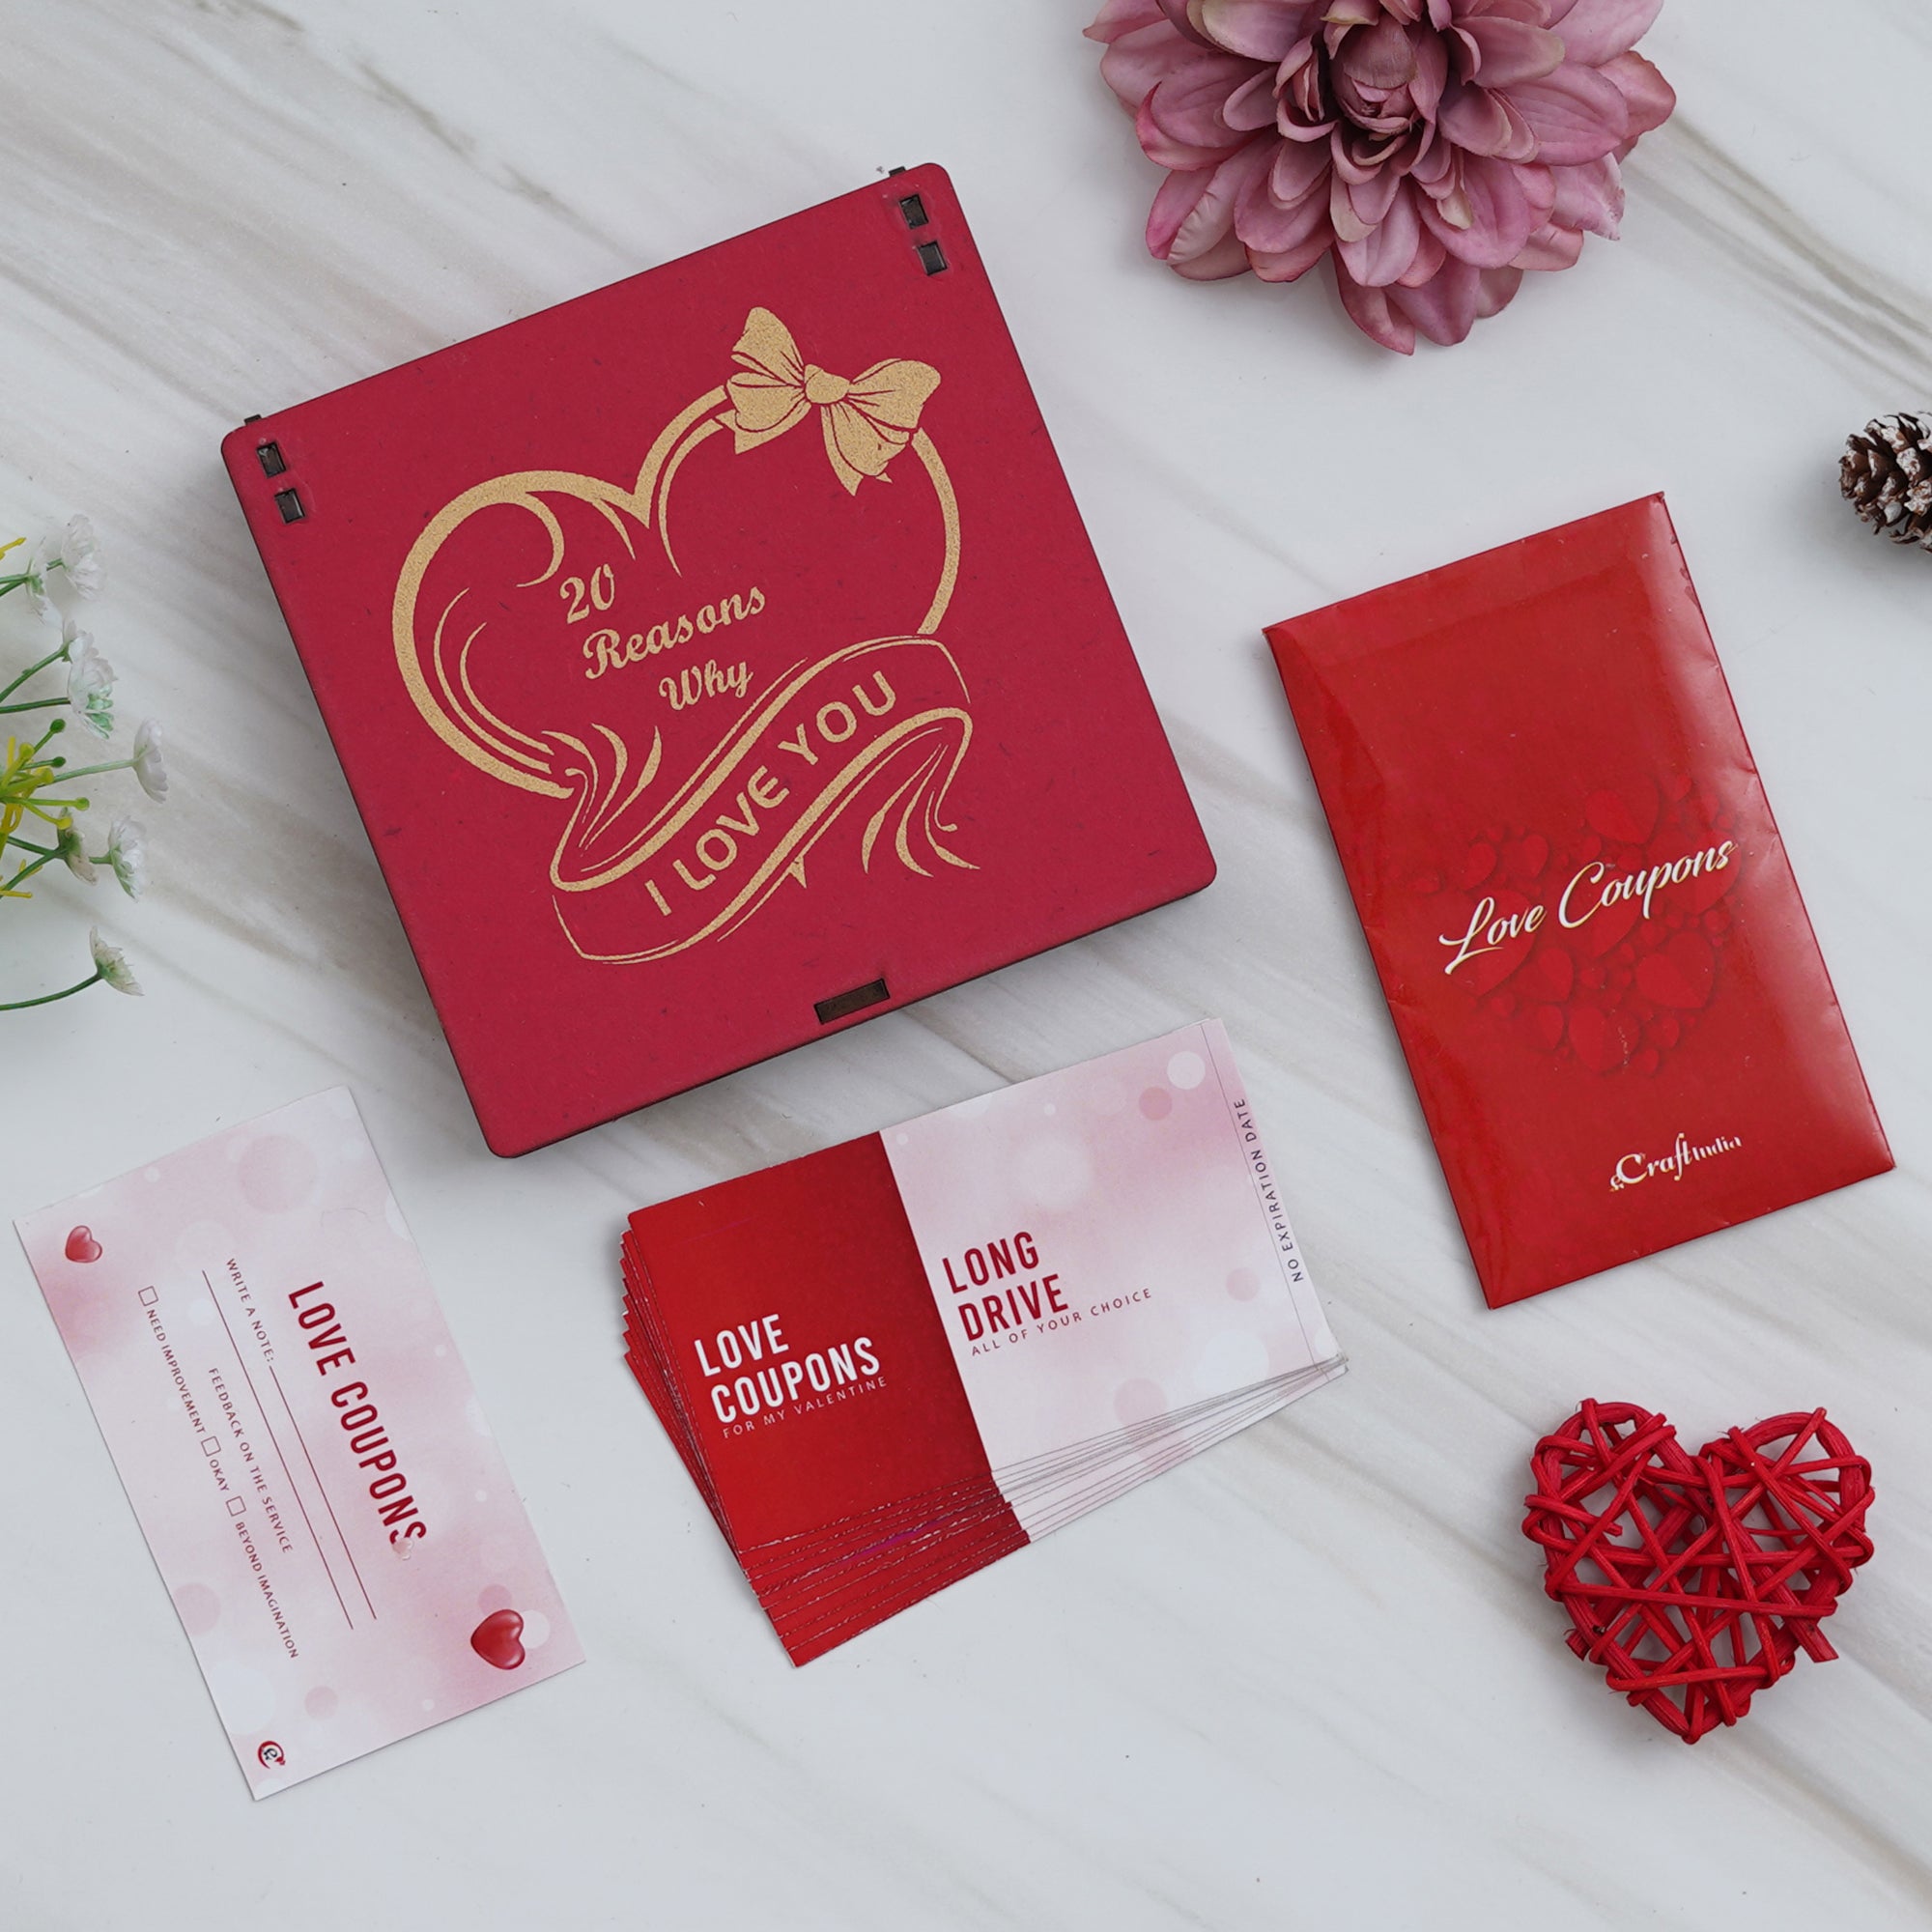 Valentine Combo of Pack of 12 Love Coupons Gift Cards Set, "20 Reasons Why I Love You" Printed on Little Red Hearts Decorative Wooden Gift Set Box